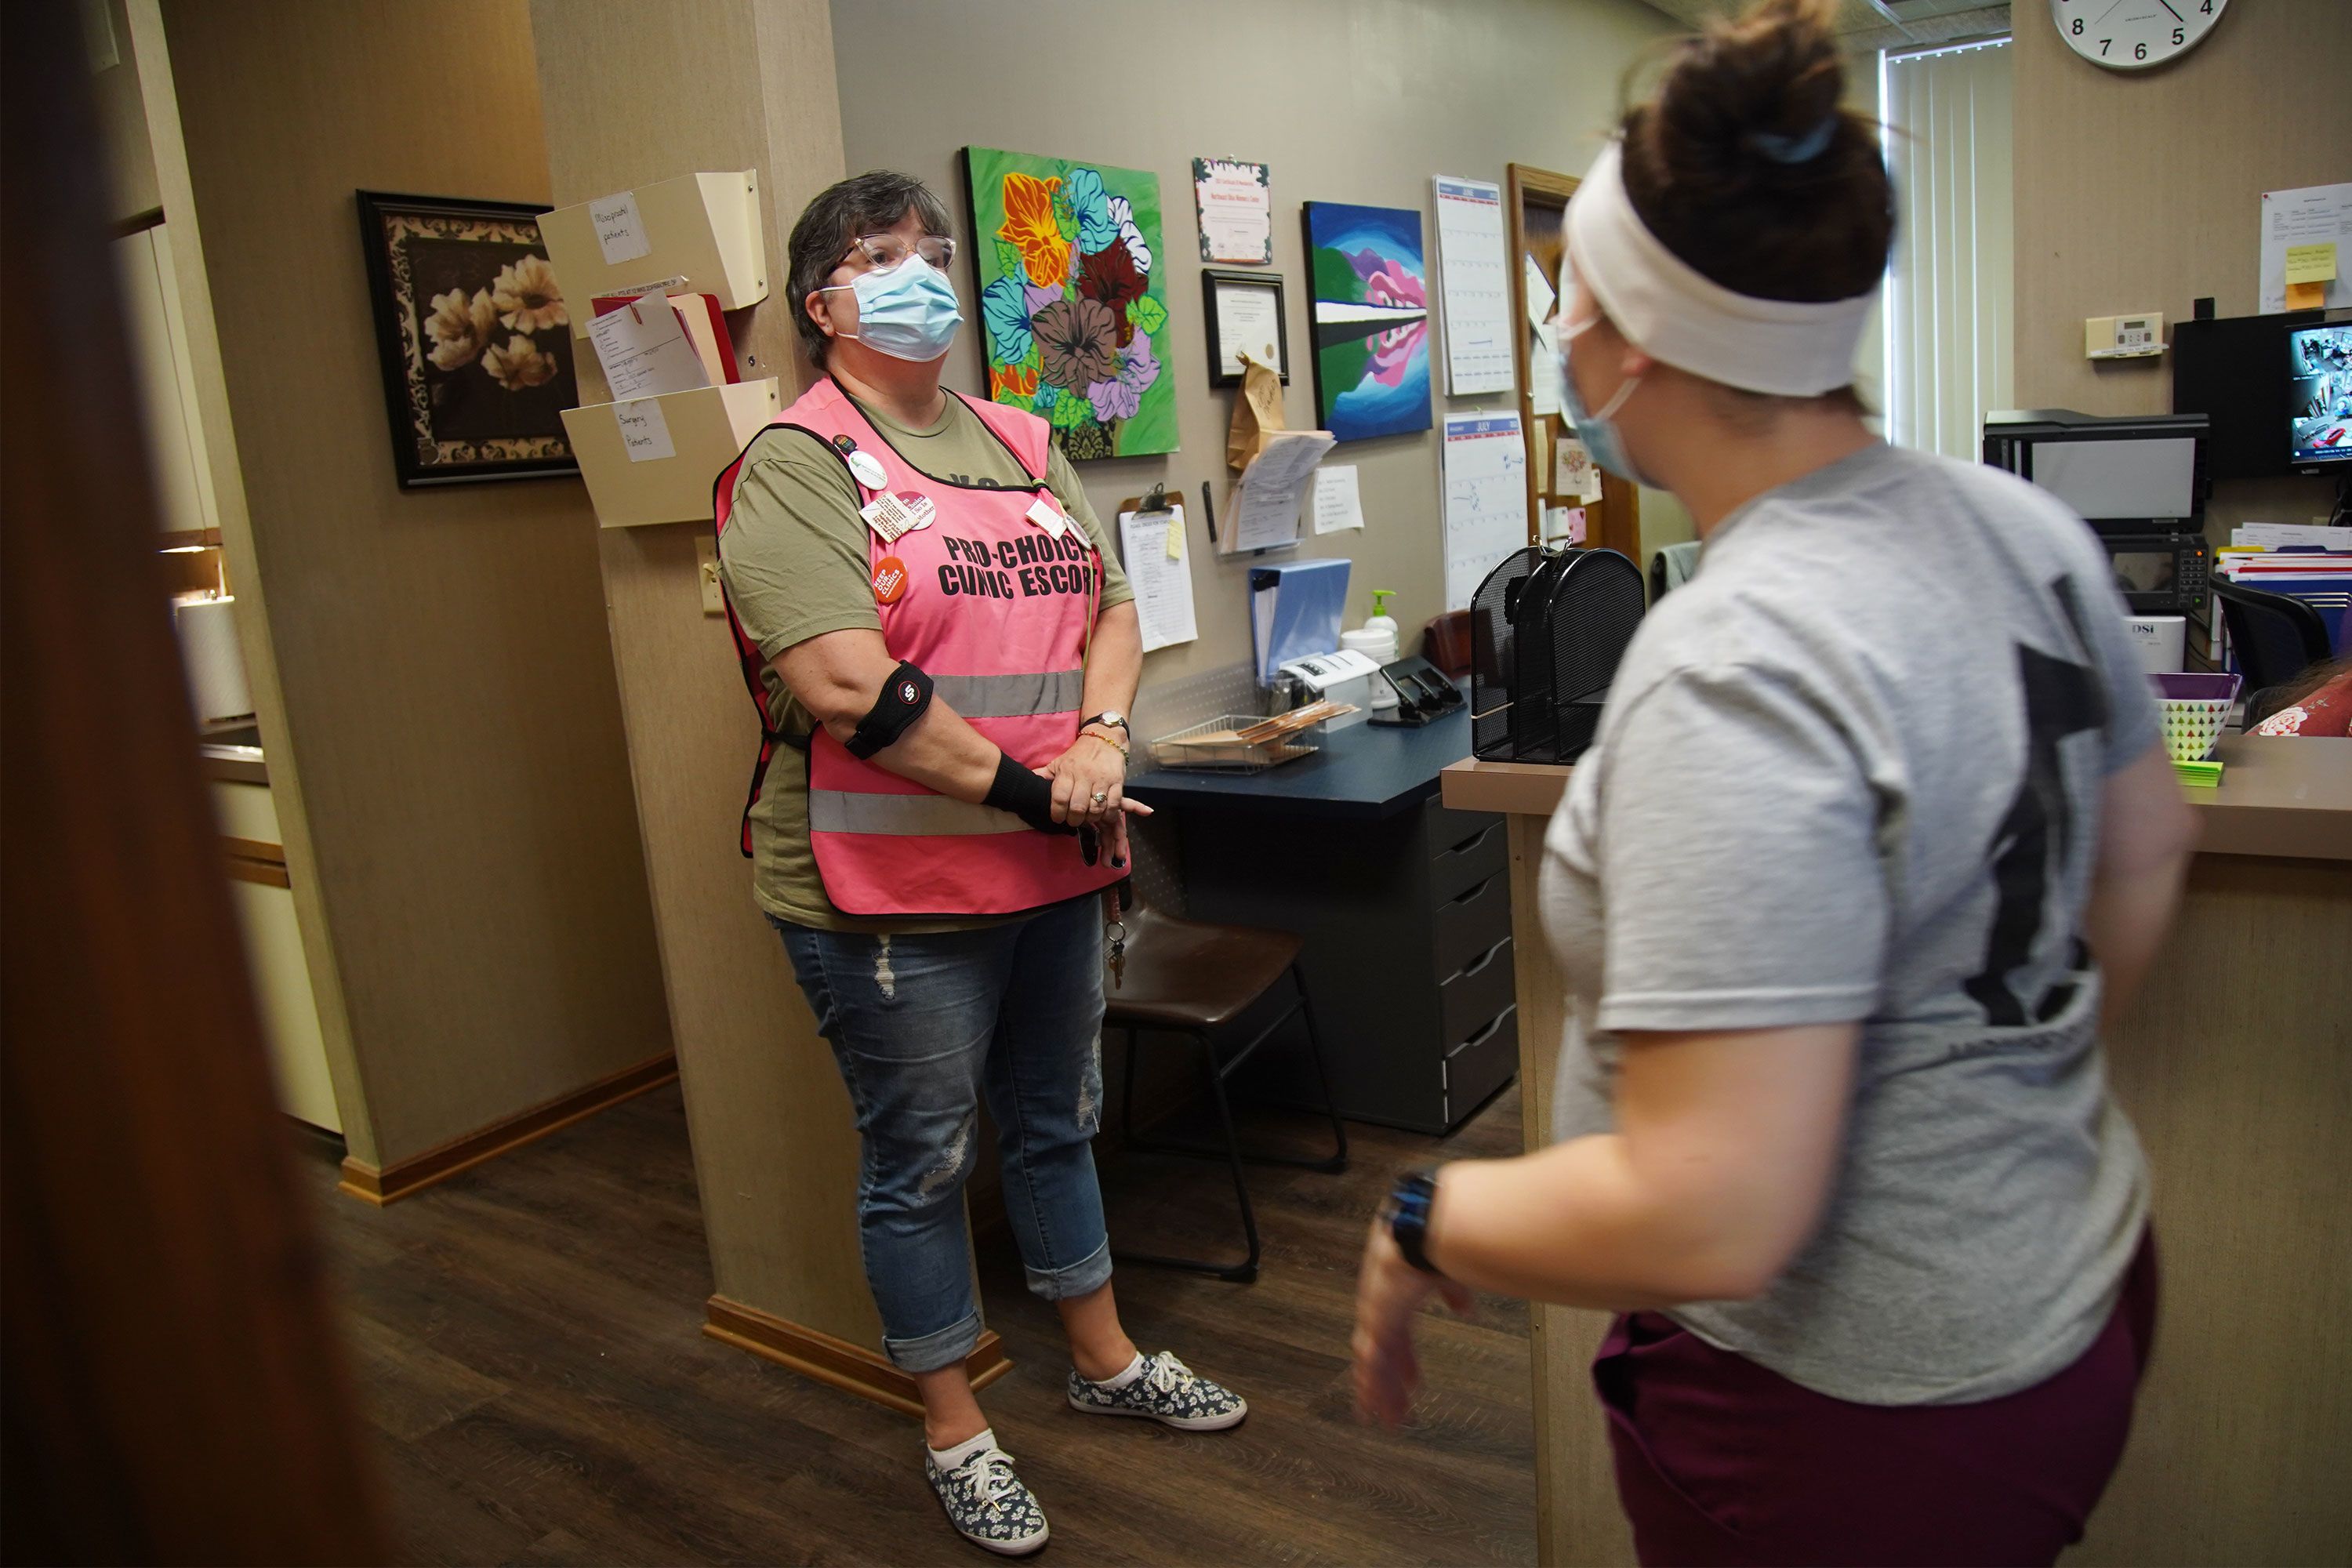 A clinic escort who goes by "Madre" stands inside the Northeast Ohio Women’s Center in Cuyahoga Falls.